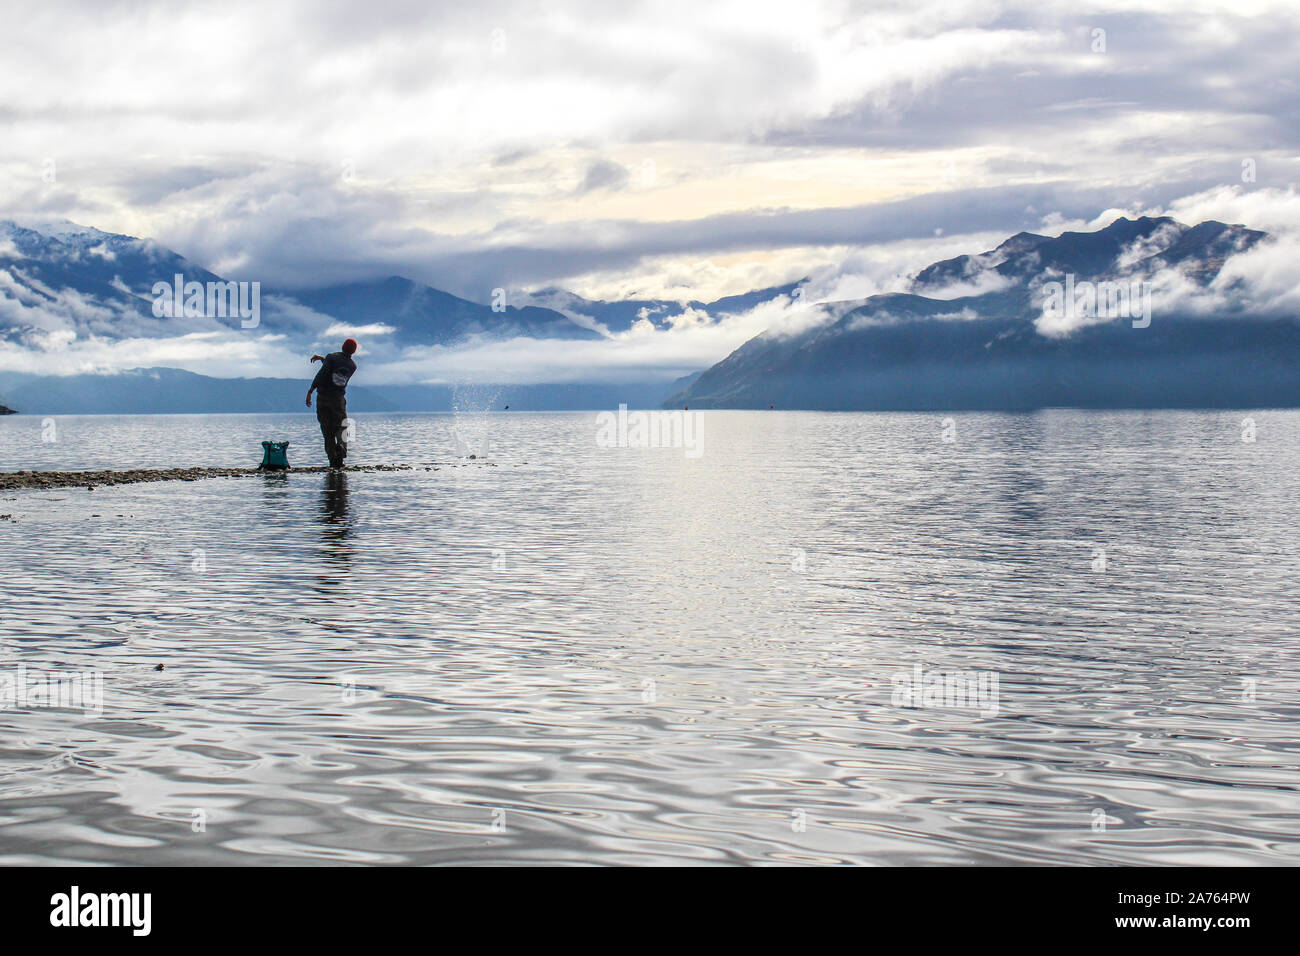 Man skipping rock in New Zealand with mountains in the background. Stock Photo